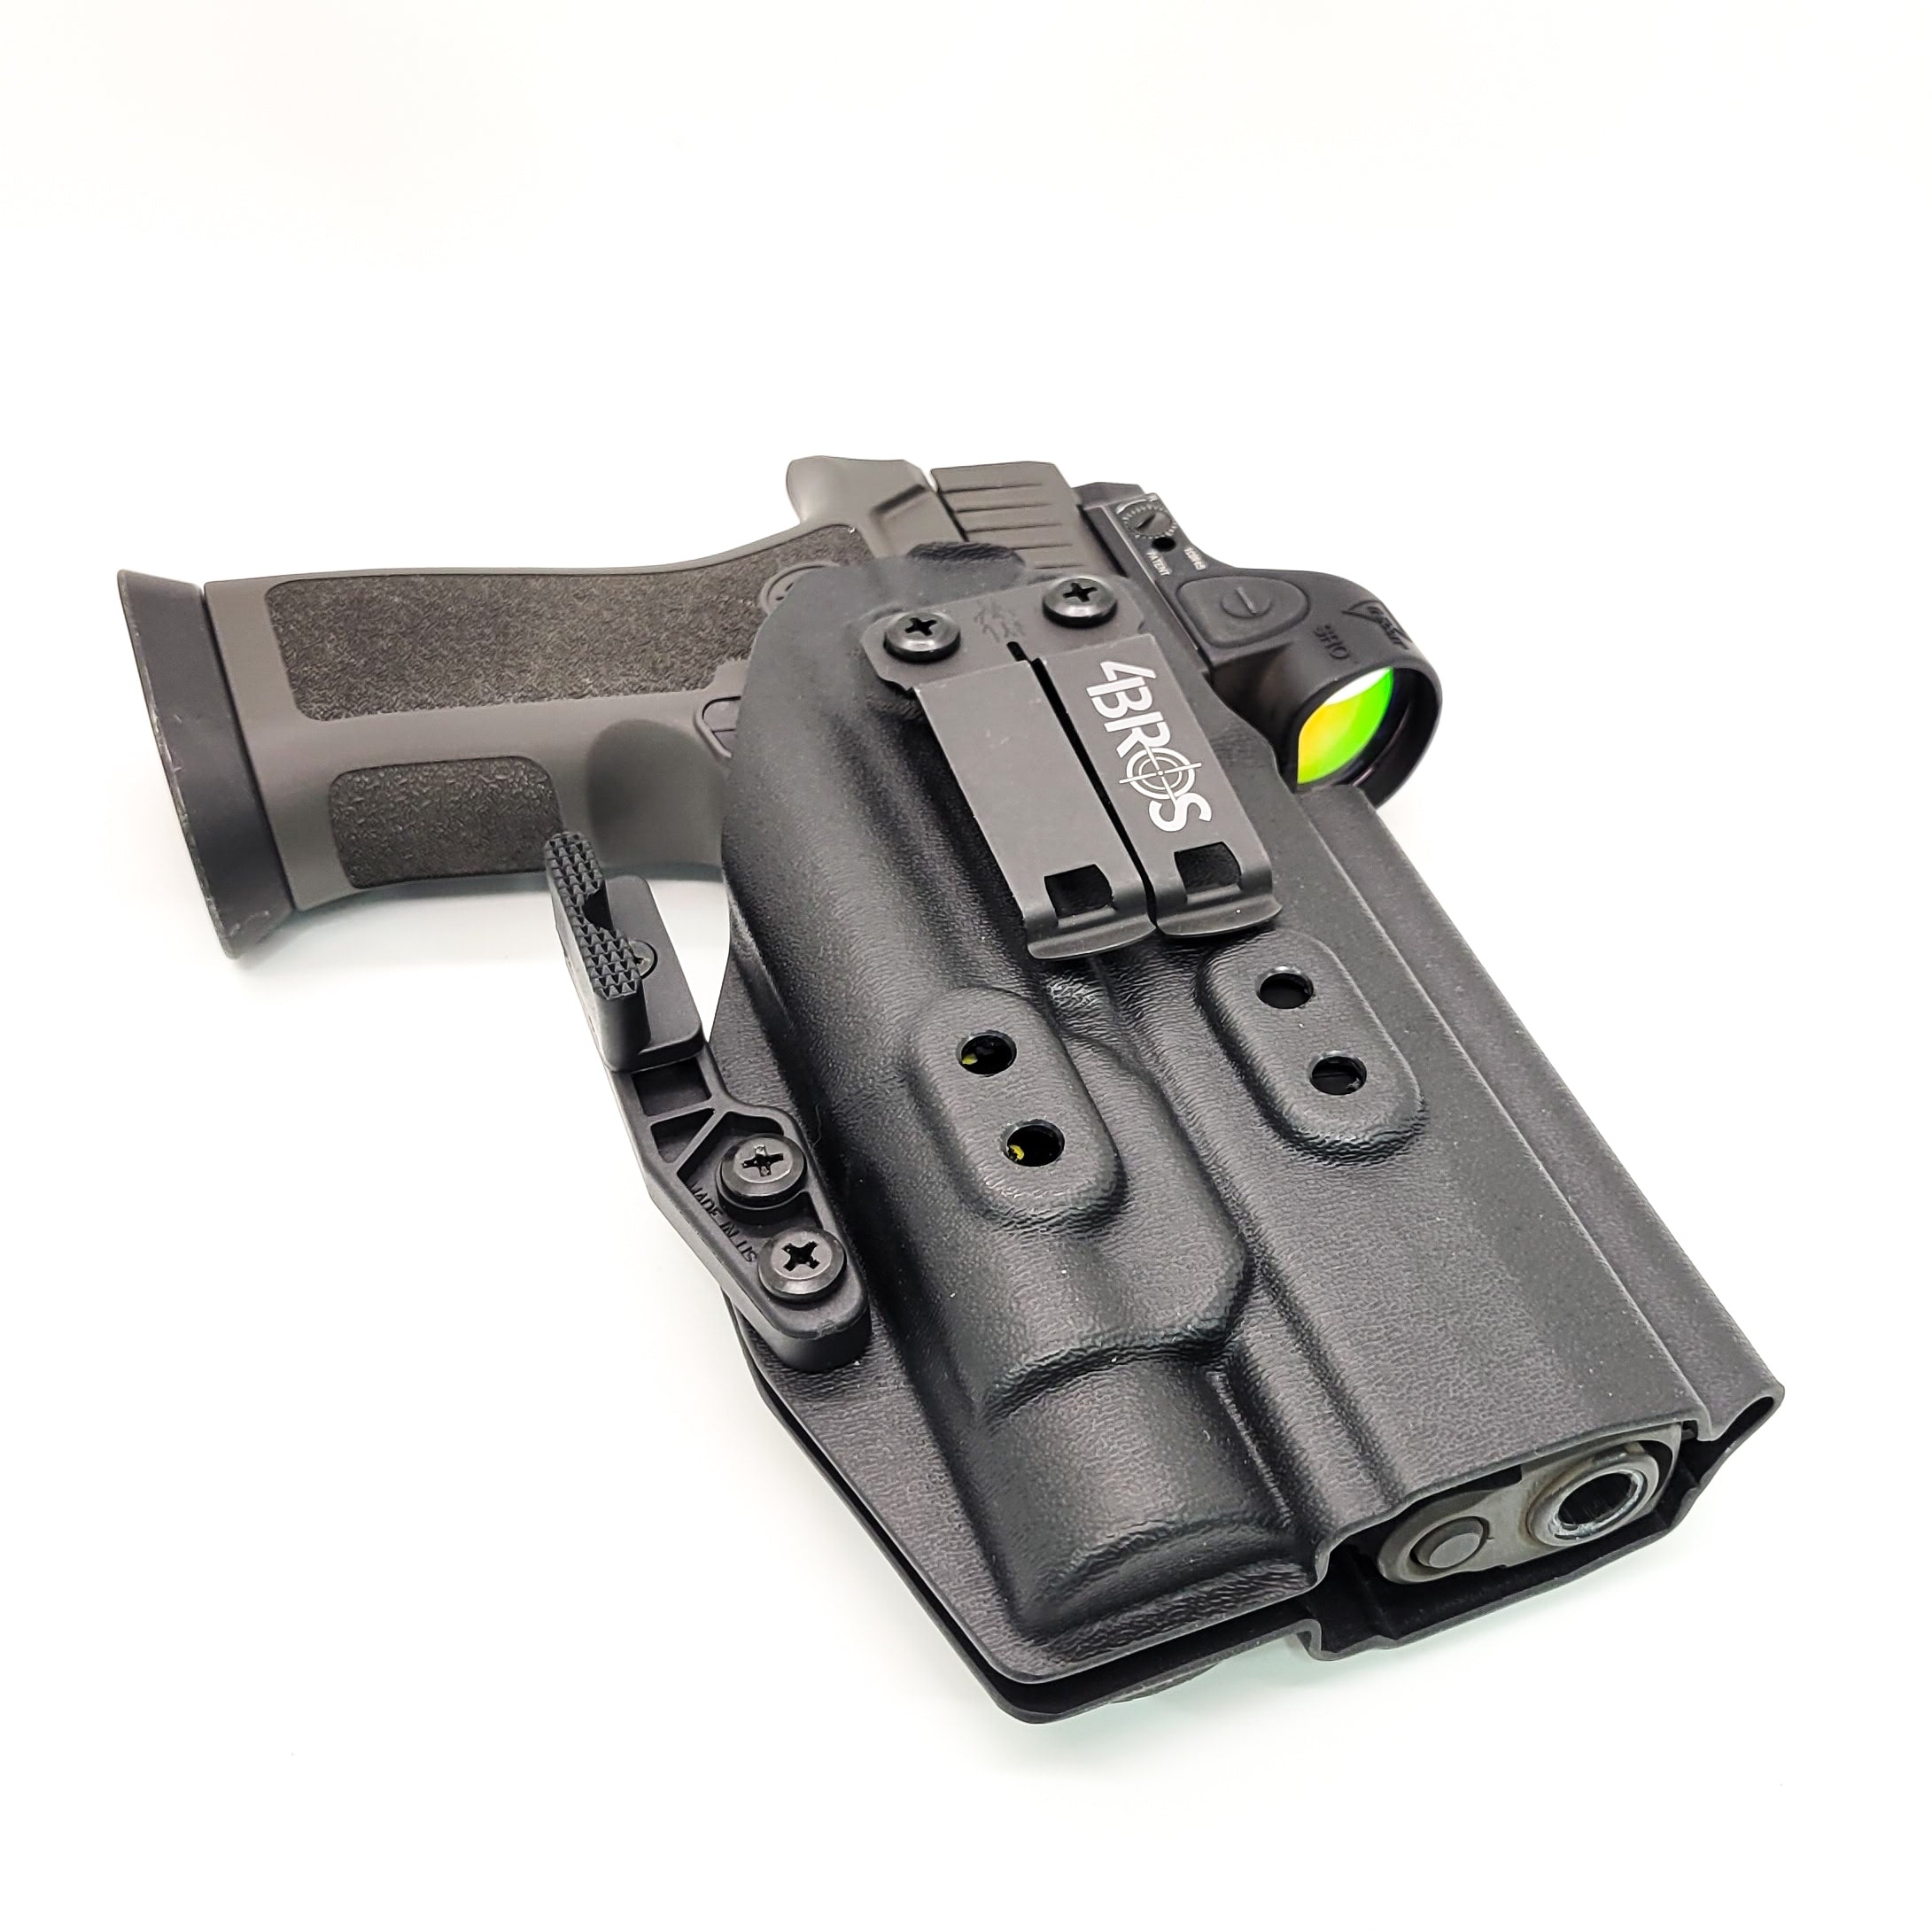 Inside Waistband Kydex Holster designed to fit the Sig Sauer P320 series of pistols with the Streamlight TLR-1 or TLR-1 HL light and GoGun USA Gas Pedal mounted to the pistol. This holster will hold the Full Size, Carry, M18, M17, X-Five and X-Five Legion if they are combined with a TLR-1 series light. Made in USA